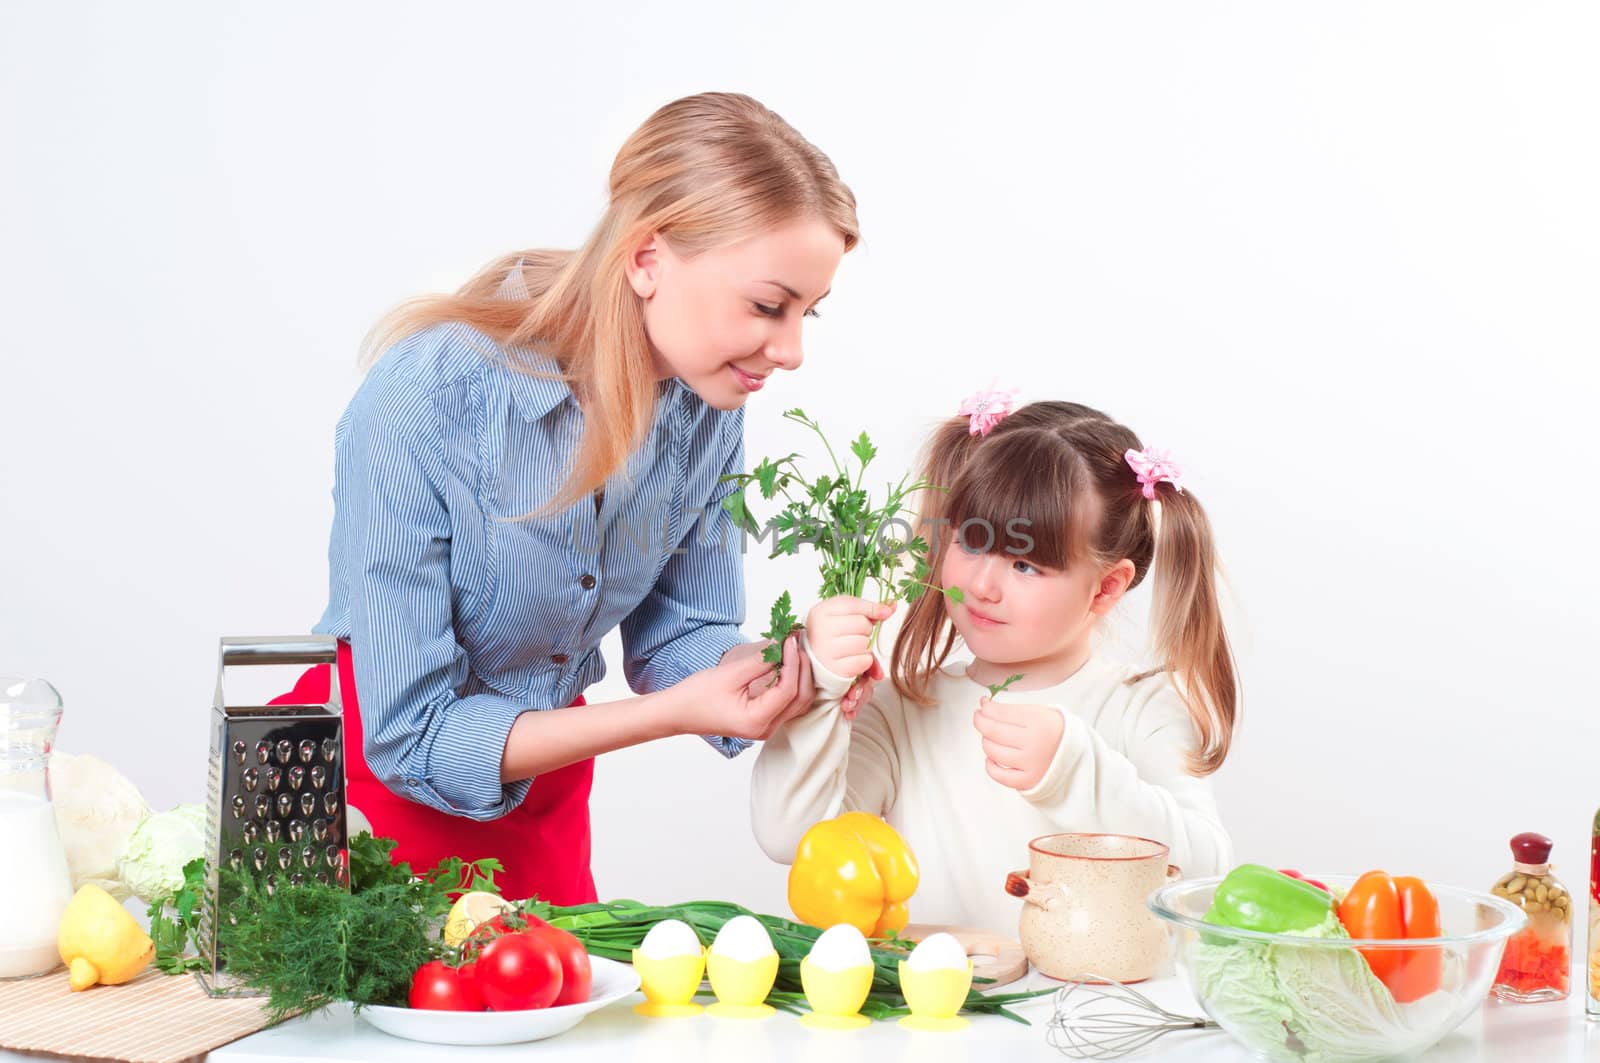 Mother and daughter cooking together, help children to parents